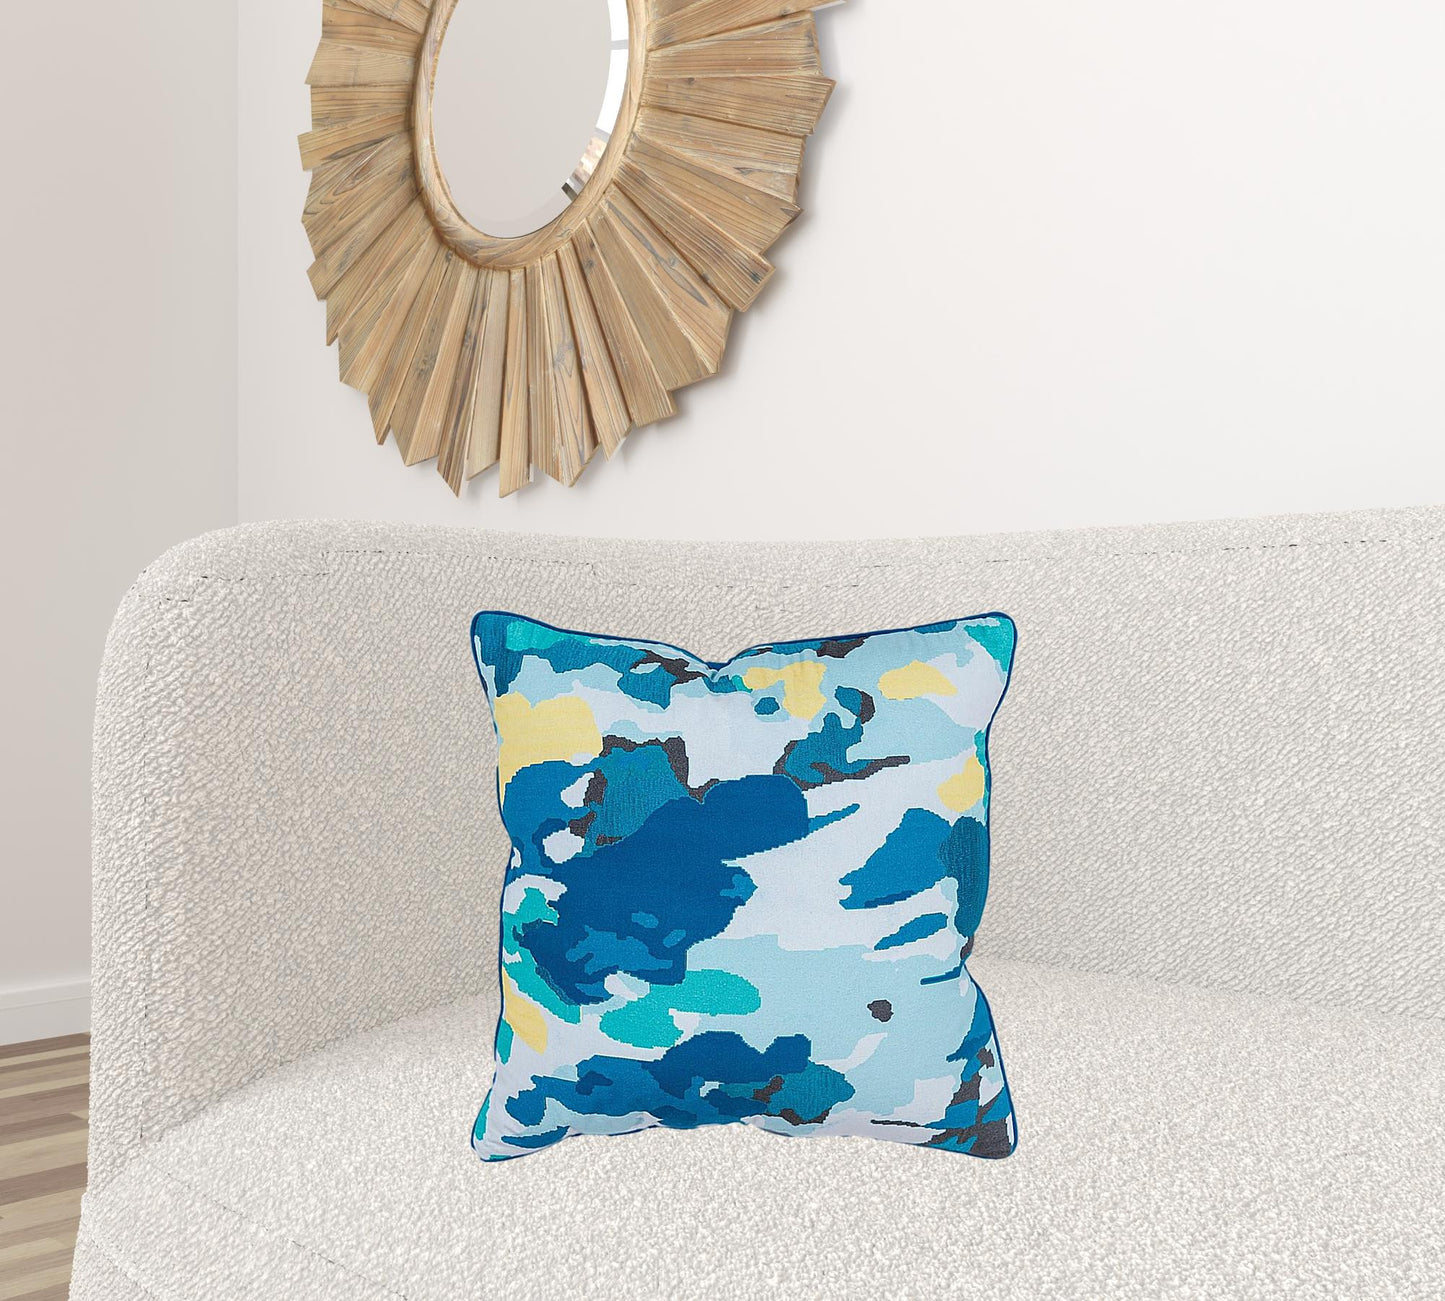 Teal Blue Abstract Impressionistic Throw Pillow